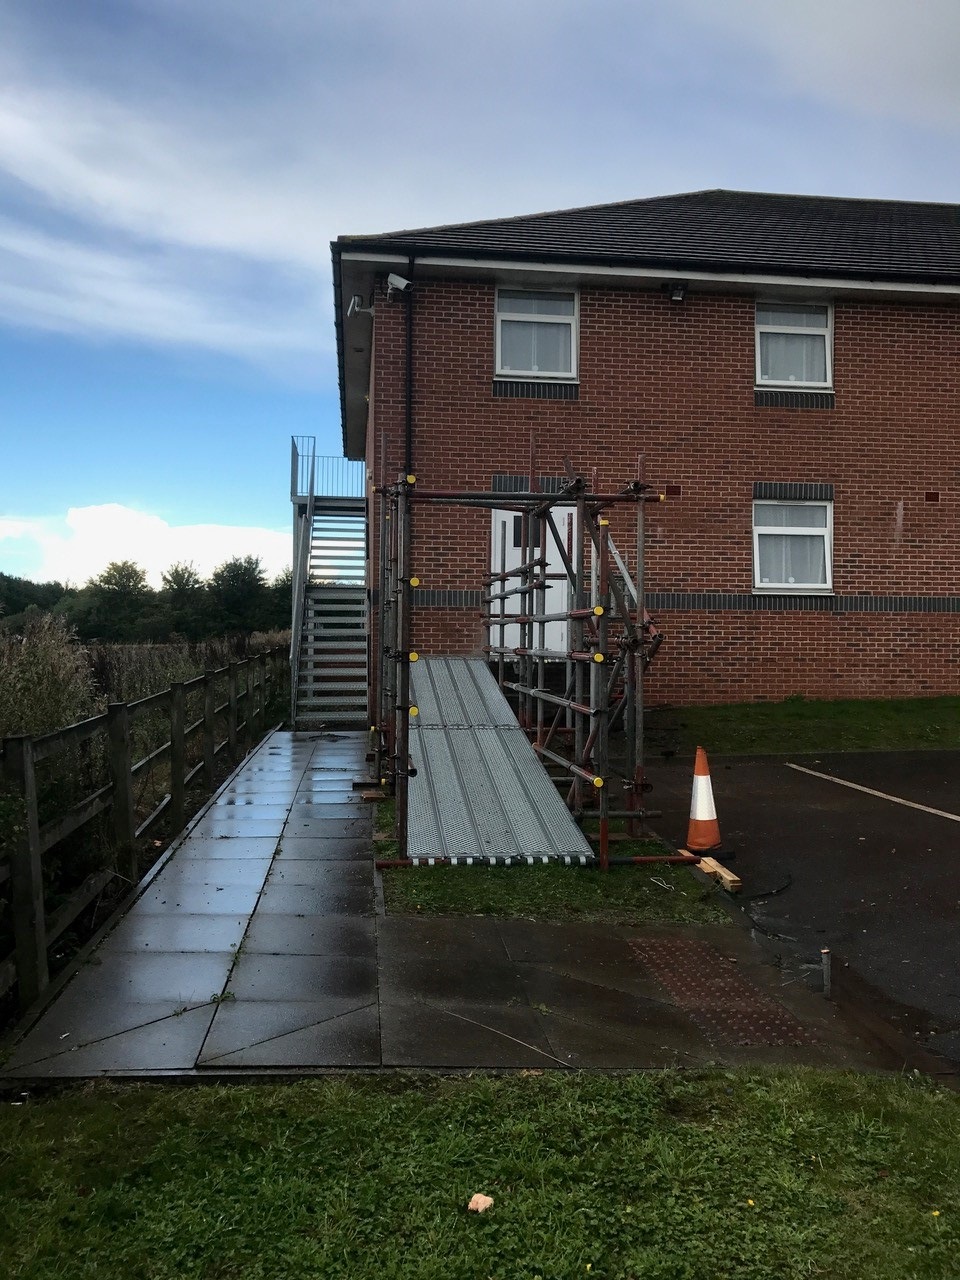 Tamworth Scaffolding: Public Access - Commercial Residential
